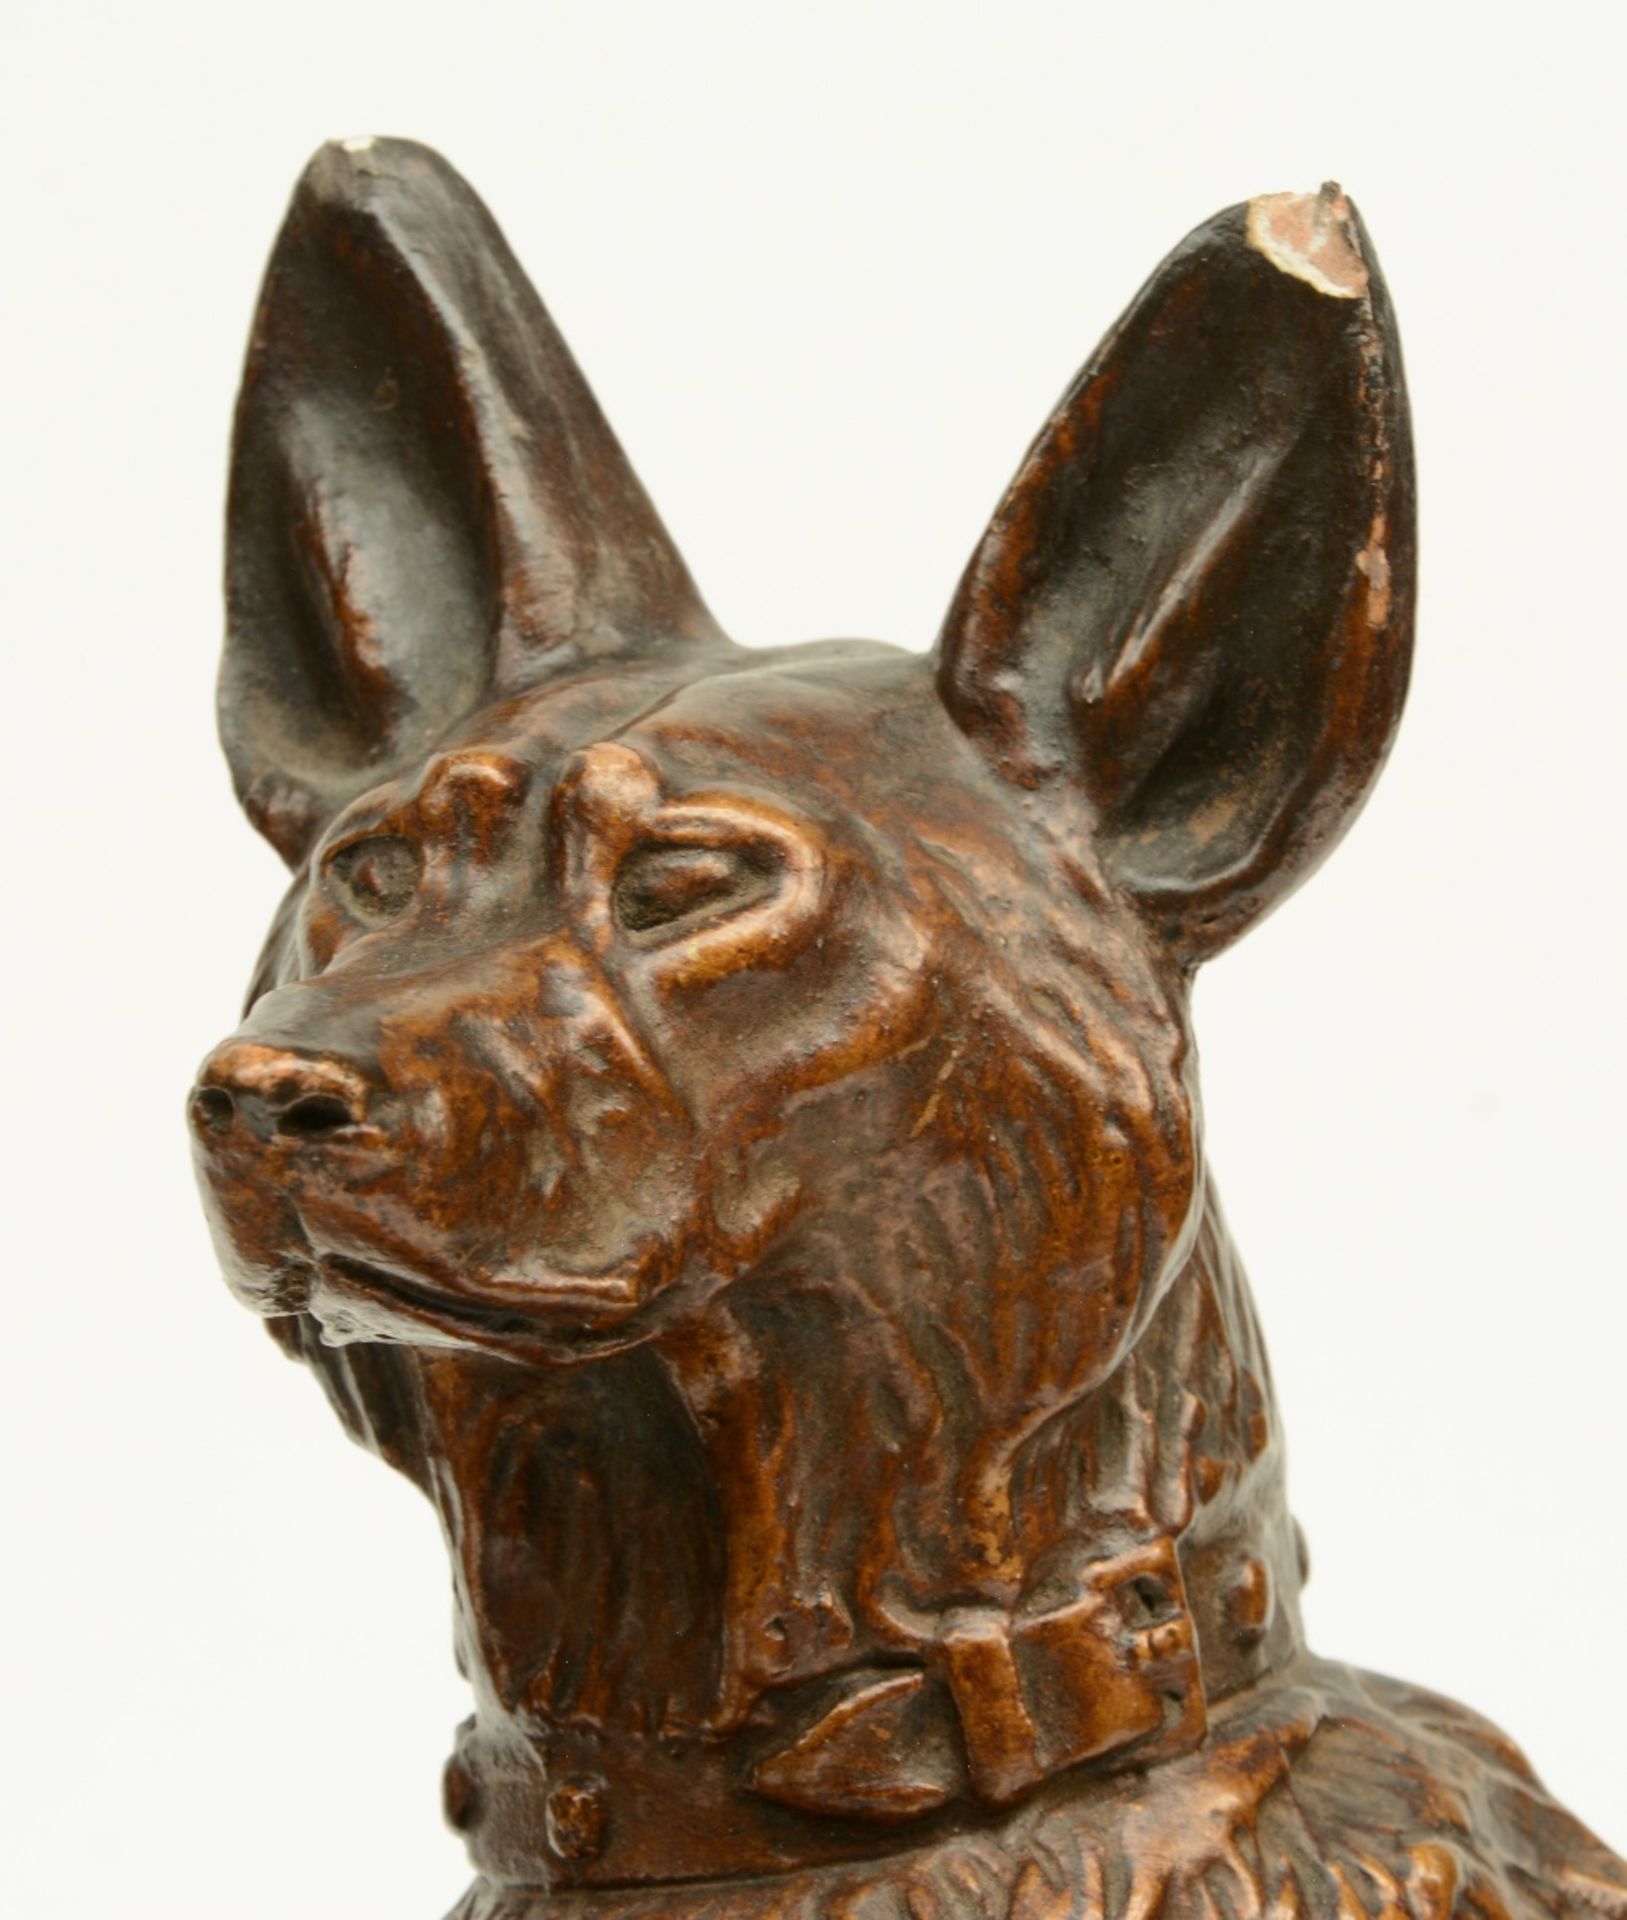 Coutier T., dogs, a bronze patinated terracotta sculpture, 1930s, H 39,5 - W 57 - D 19 cm - Image 5 of 8